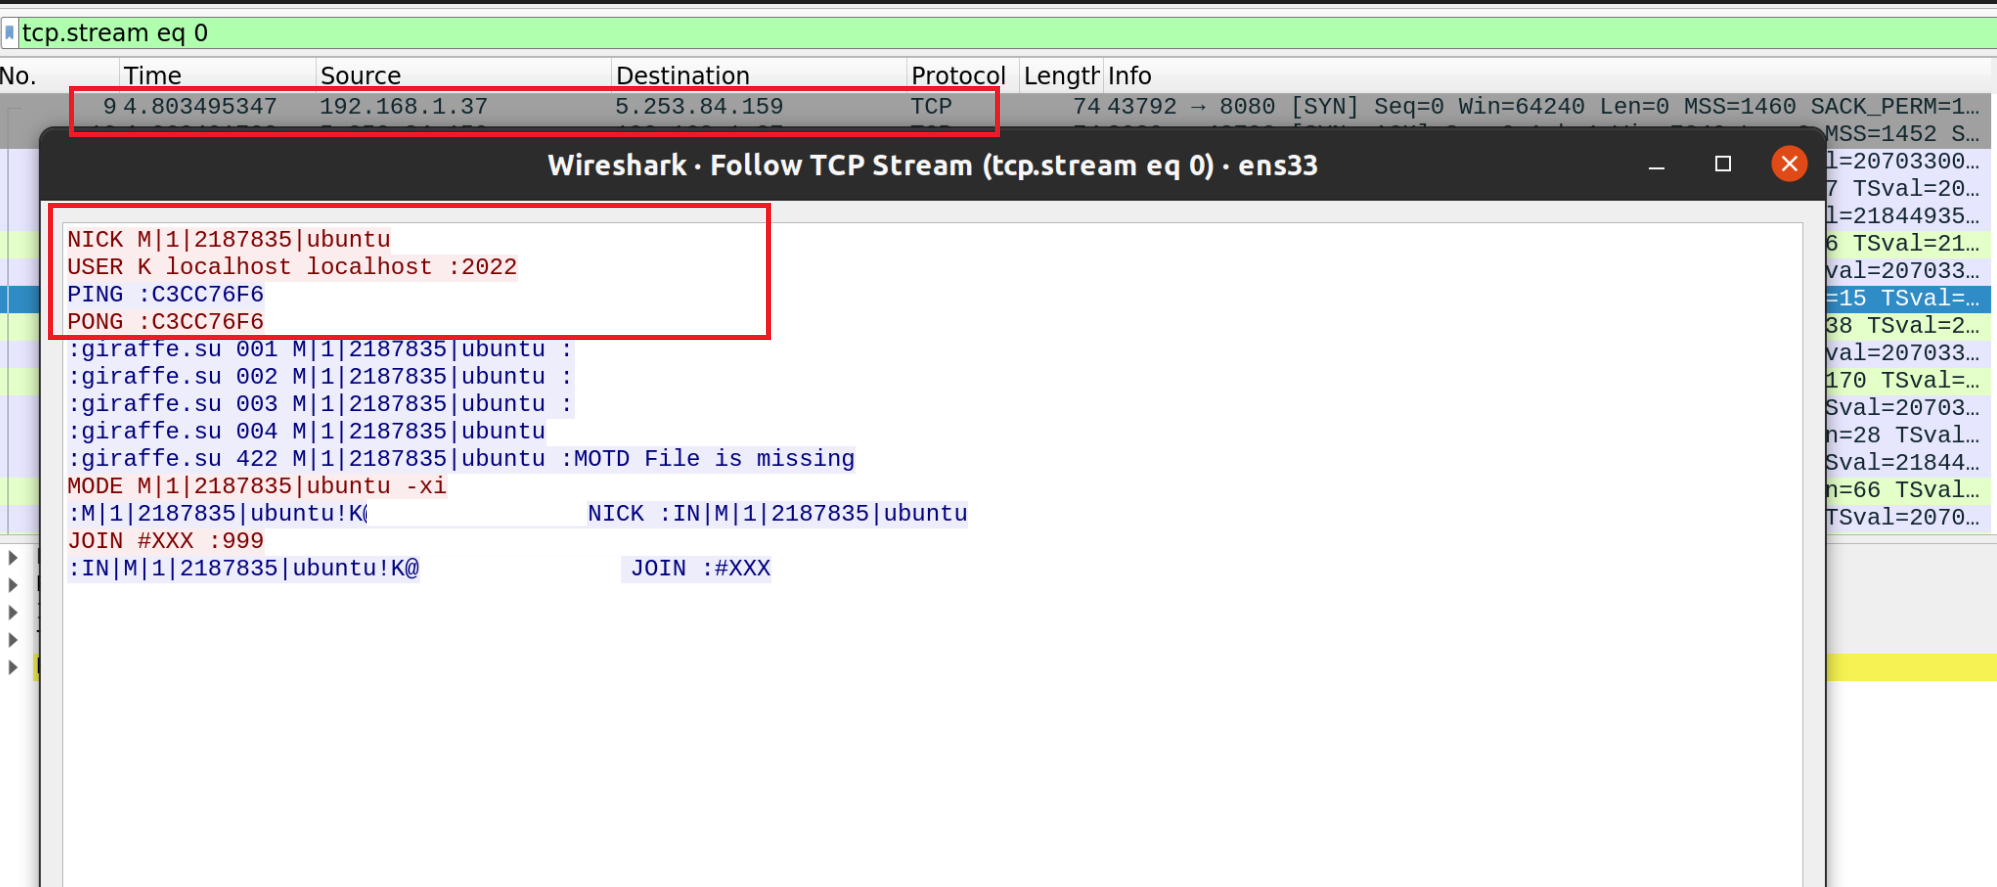 Image 9 is a screenshot of Wireshark showing the victim and C2 communication via an IRC bot. 